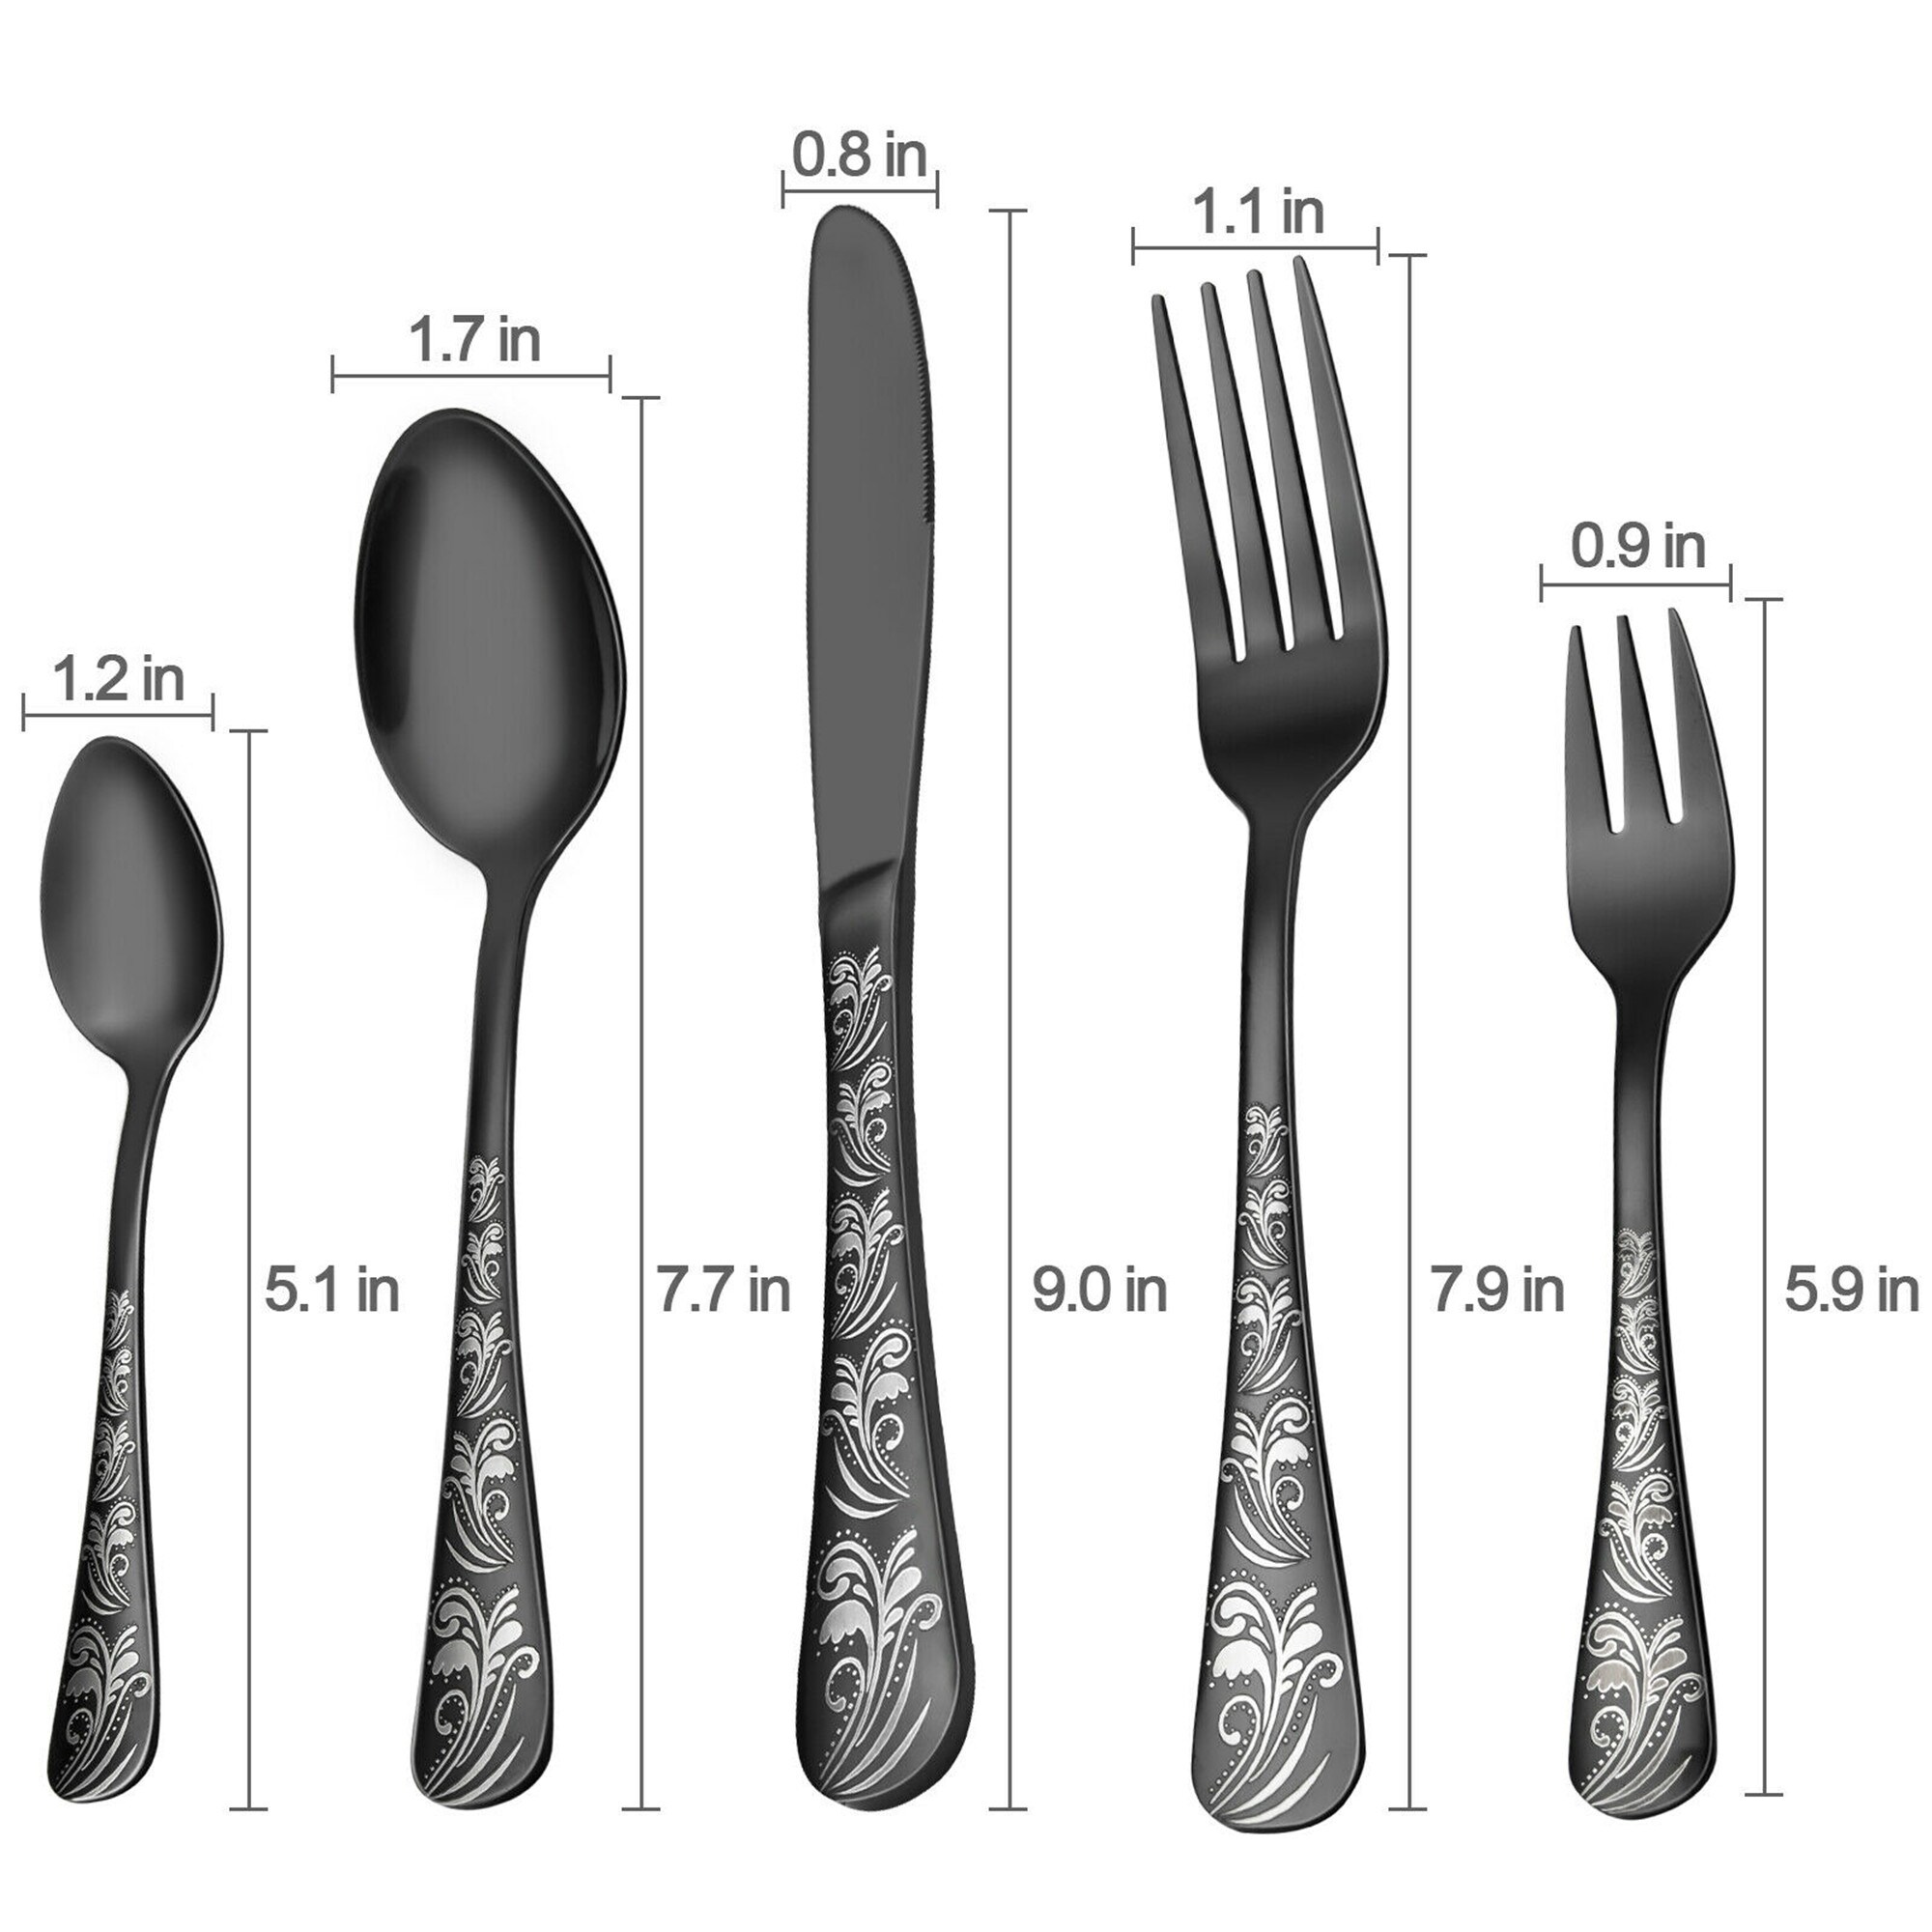 https://ak1.ostkcdn.com/images/products/is/images/direct/a2fd3b41a542cfa83244920cc1032bd85b65b31d/45Pcs-20Pcs-Black-Flatware-Set-Stainless-Steel-Silverware-Cutlery-Set-Service-For-8-Machine-wash-safe.jpg